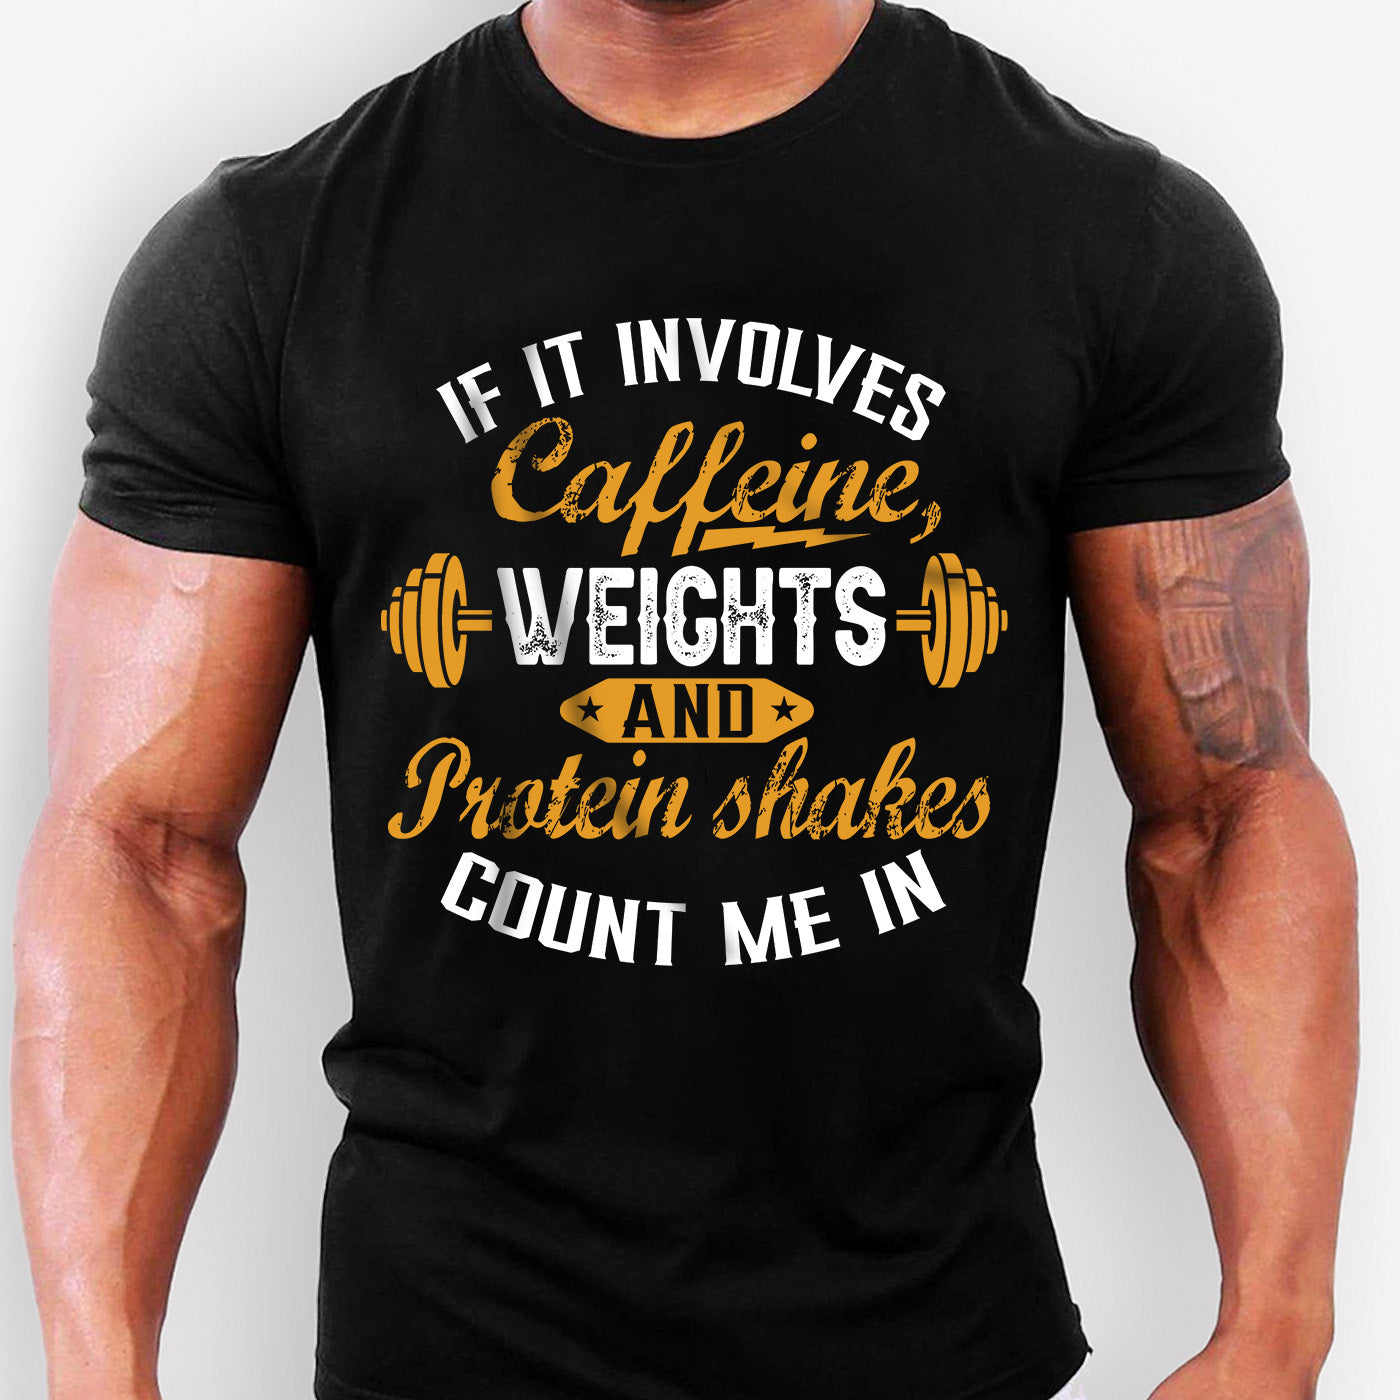 Pump Cover Gym Shirts, If It Involves Caffeine, Weights And Protein Shakes, Oversized gym shirts